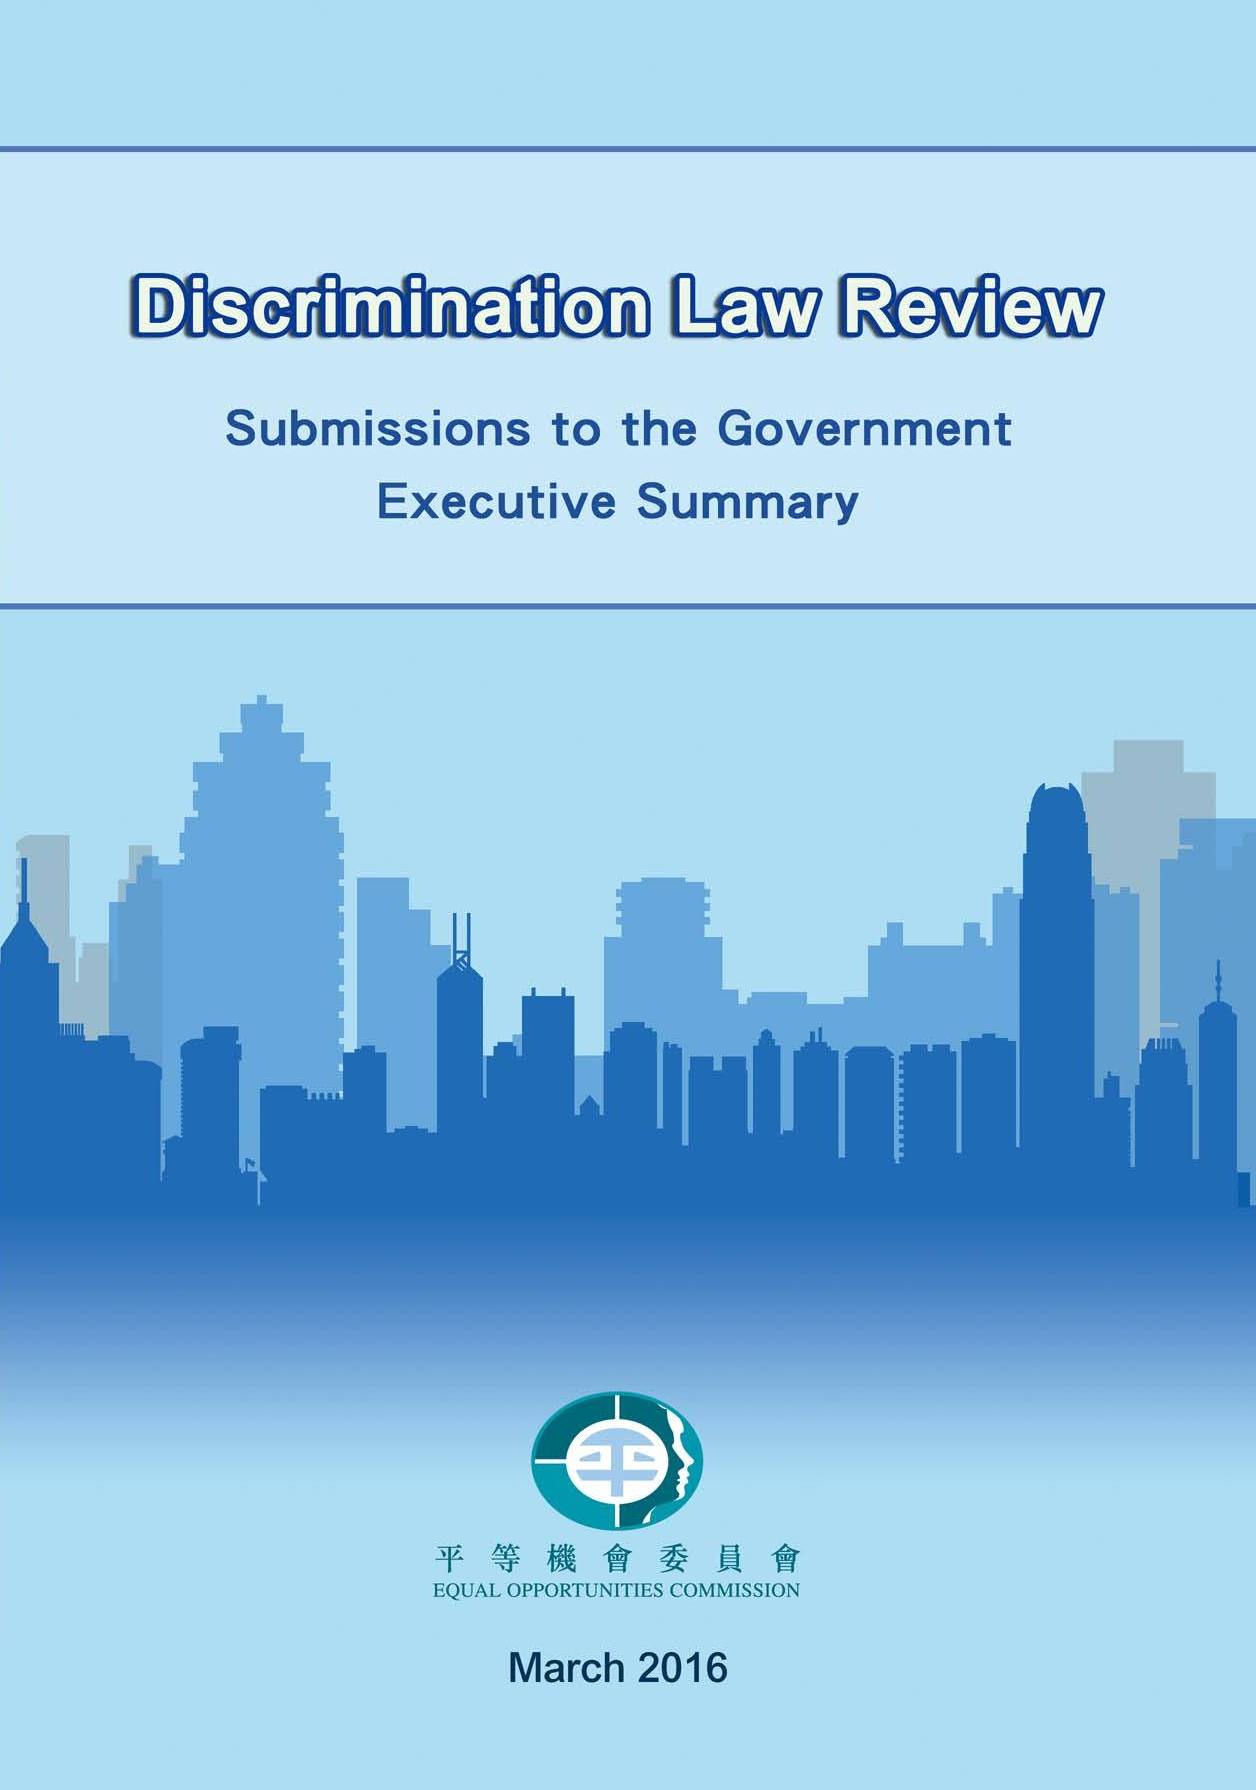 Cover of the Executive Summary of the EOC’s Submission to the Government